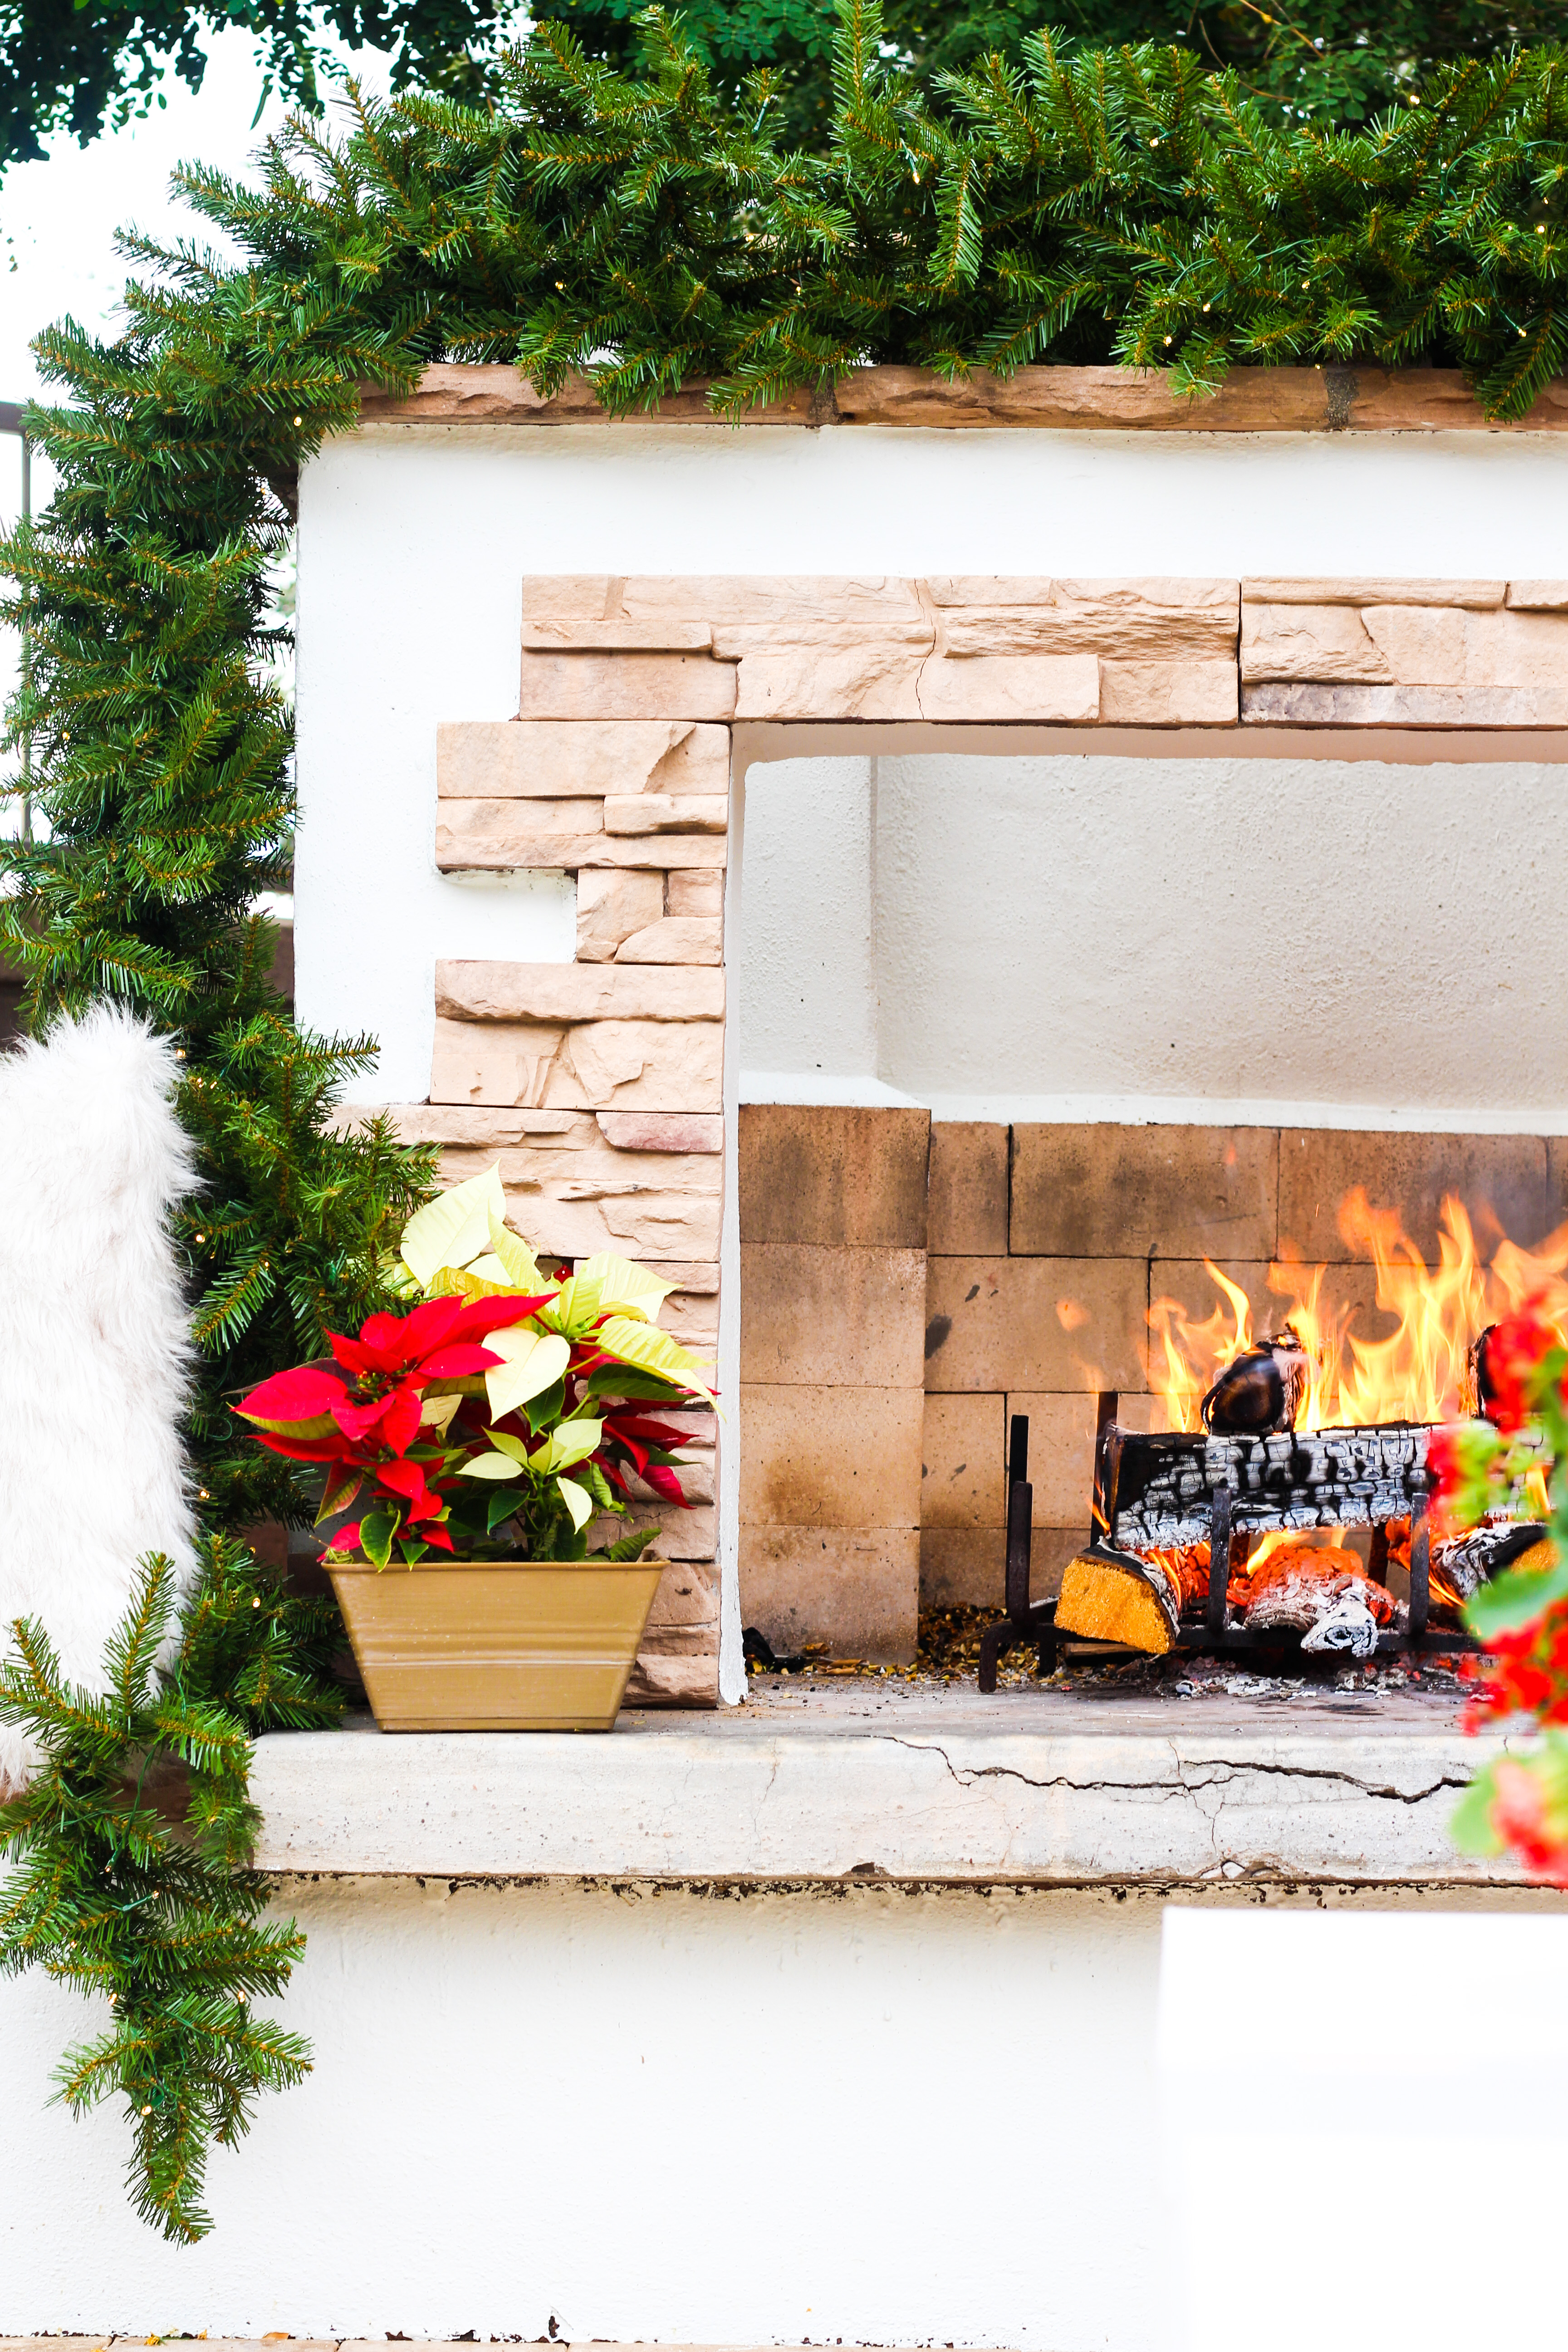 outdoor fireplace at Christmas - outdoor mantel - This is our Bliss #christmaspatio #ourdoorfireplace